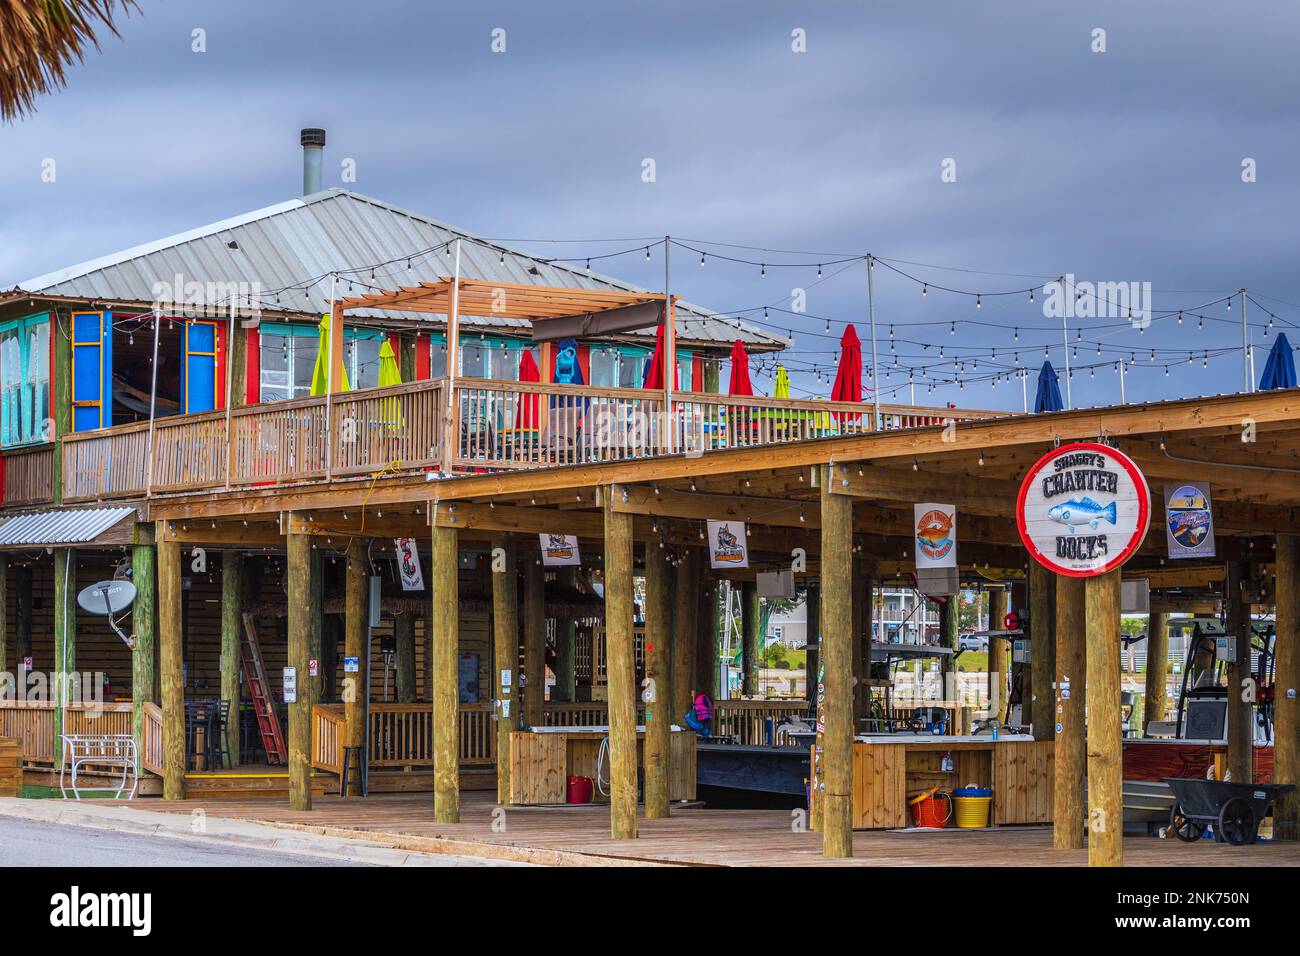 Shaggy's Restaurant and fishing charter boat dock in Pass Christian Harbor, Mississippi, USA. Stock Photo